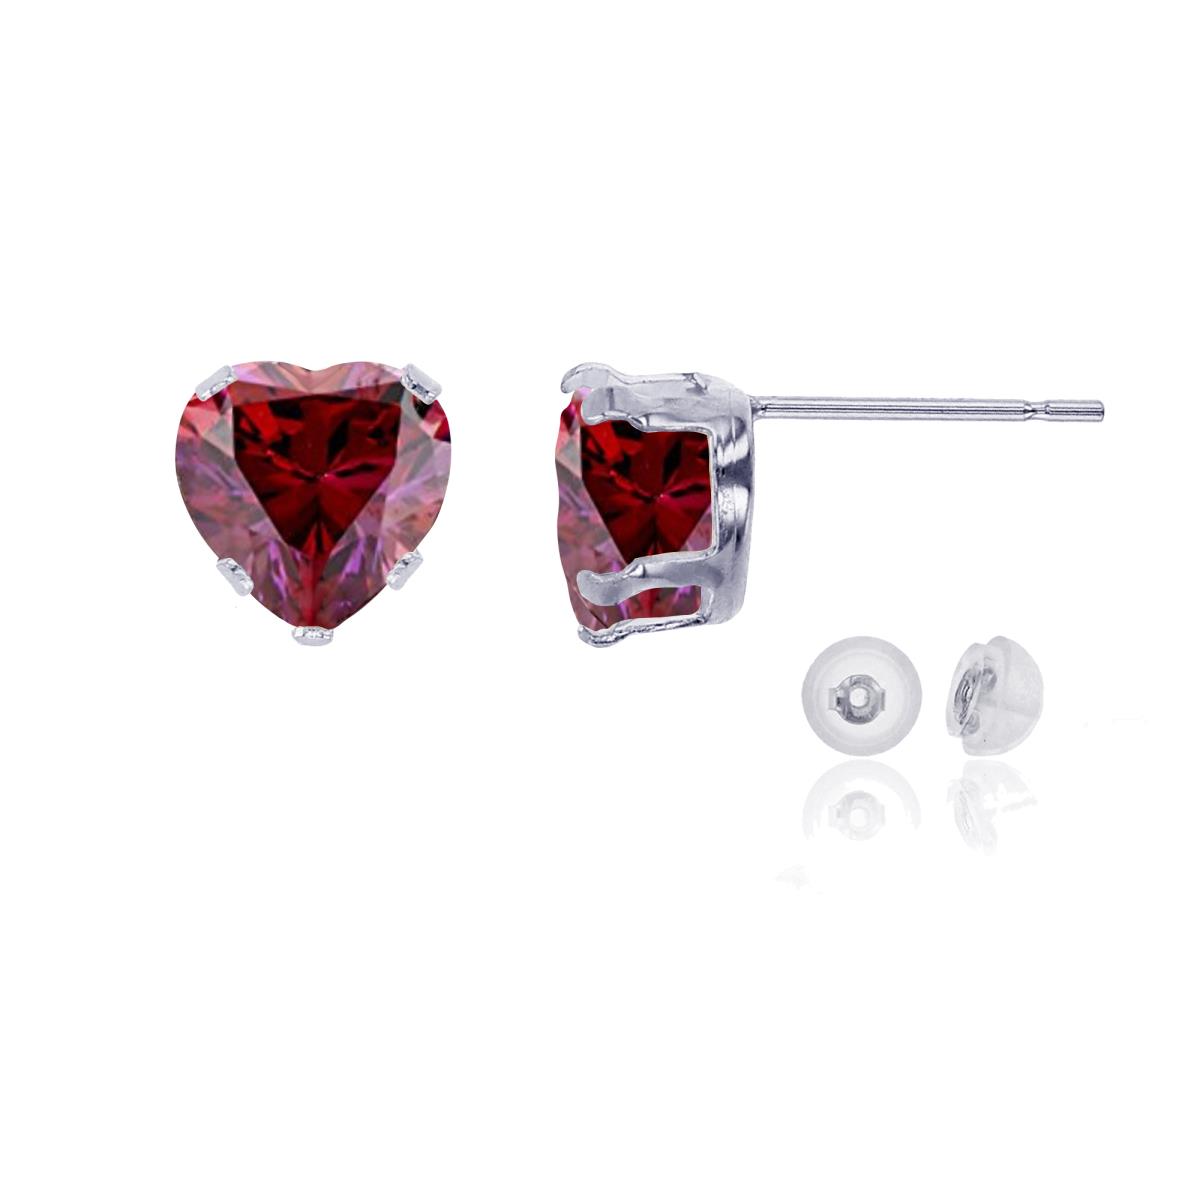 14K White Gold 6x6mm Heart Cr Ruby Stud Earring with Silicone Back